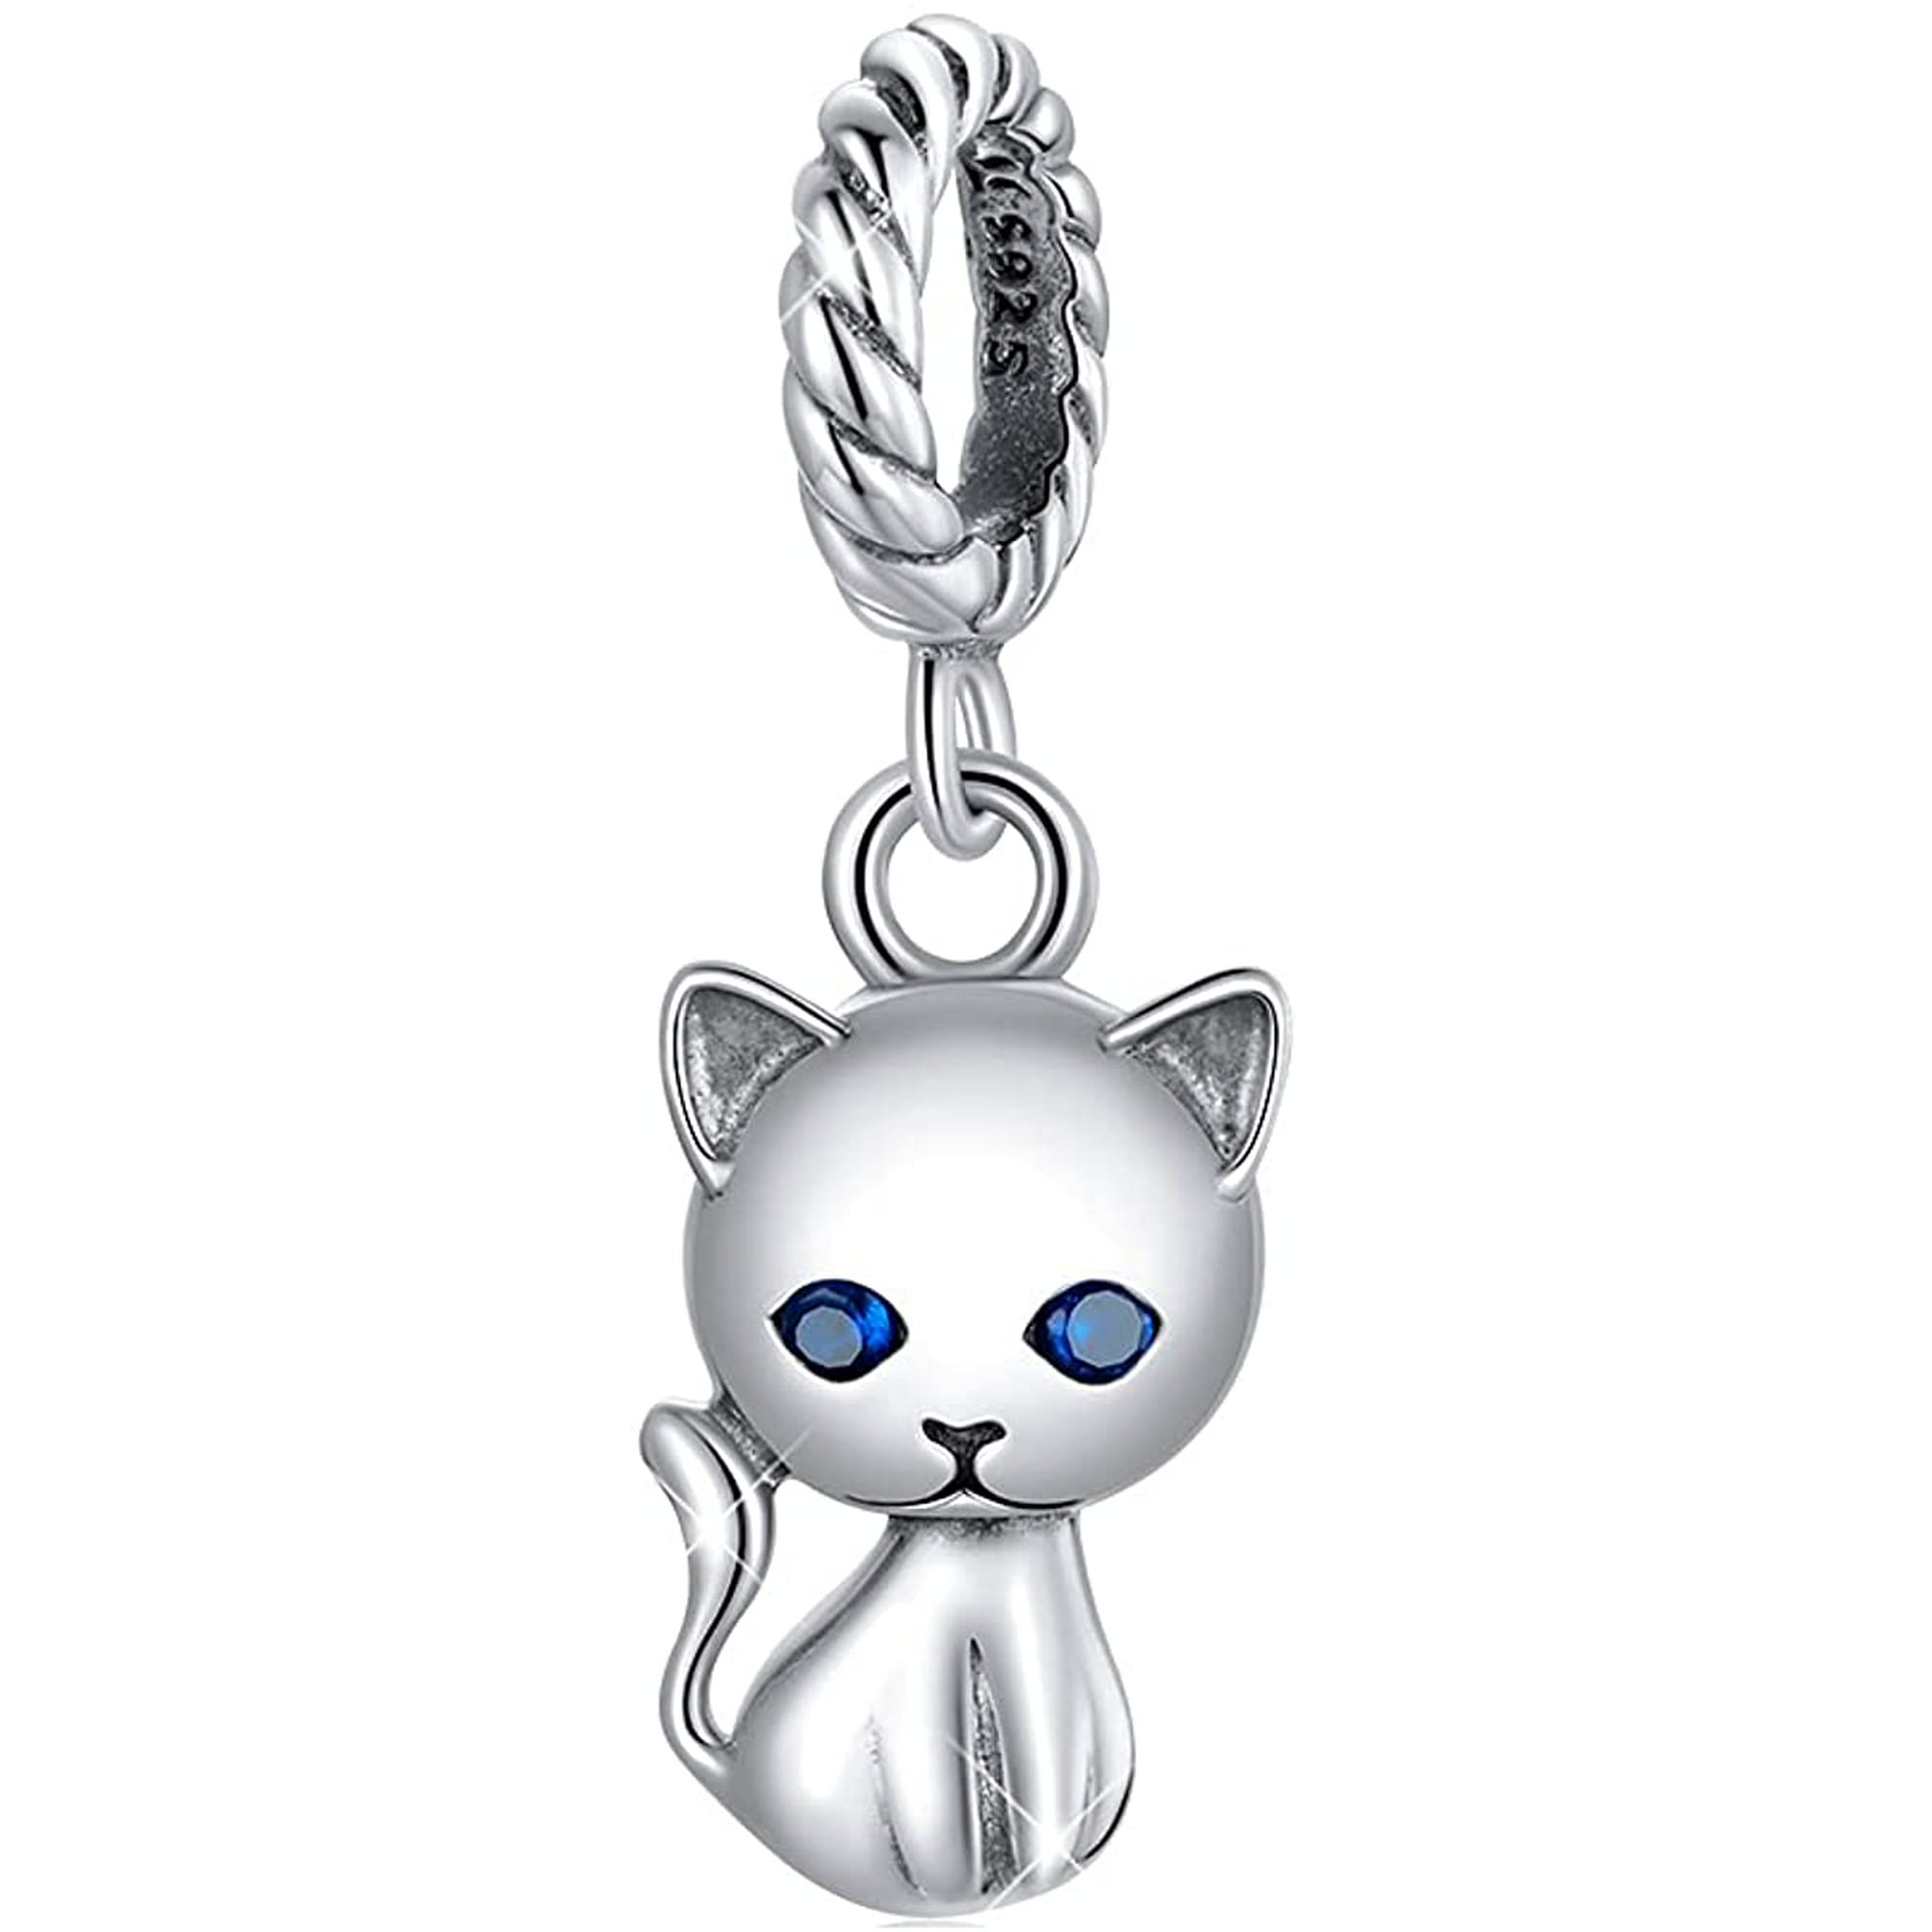 NEW LAST ONES!! CAT STERLING SILVER CHARM 